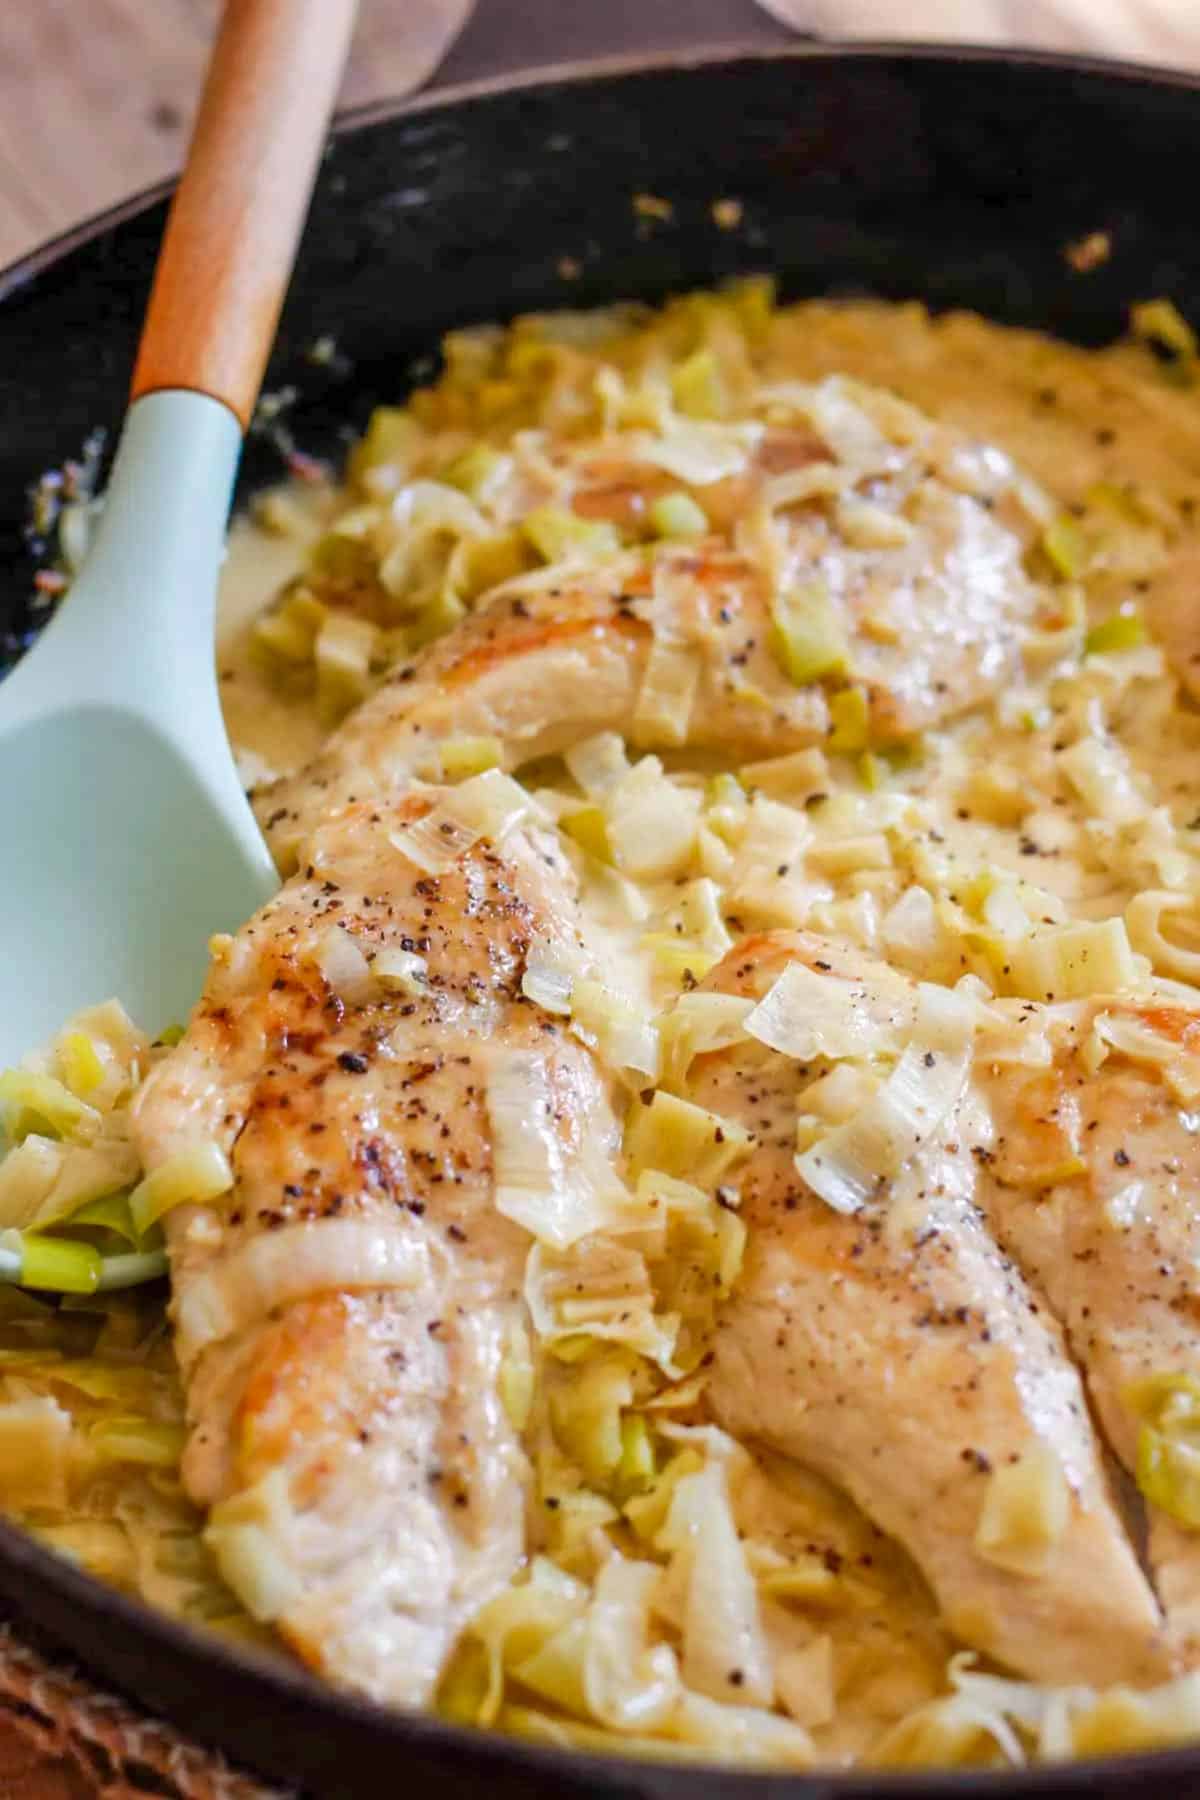 A cast iron pan containing creamy chicken breasts and leeks. There is a blue spoon with a wooden handle in the bowl.